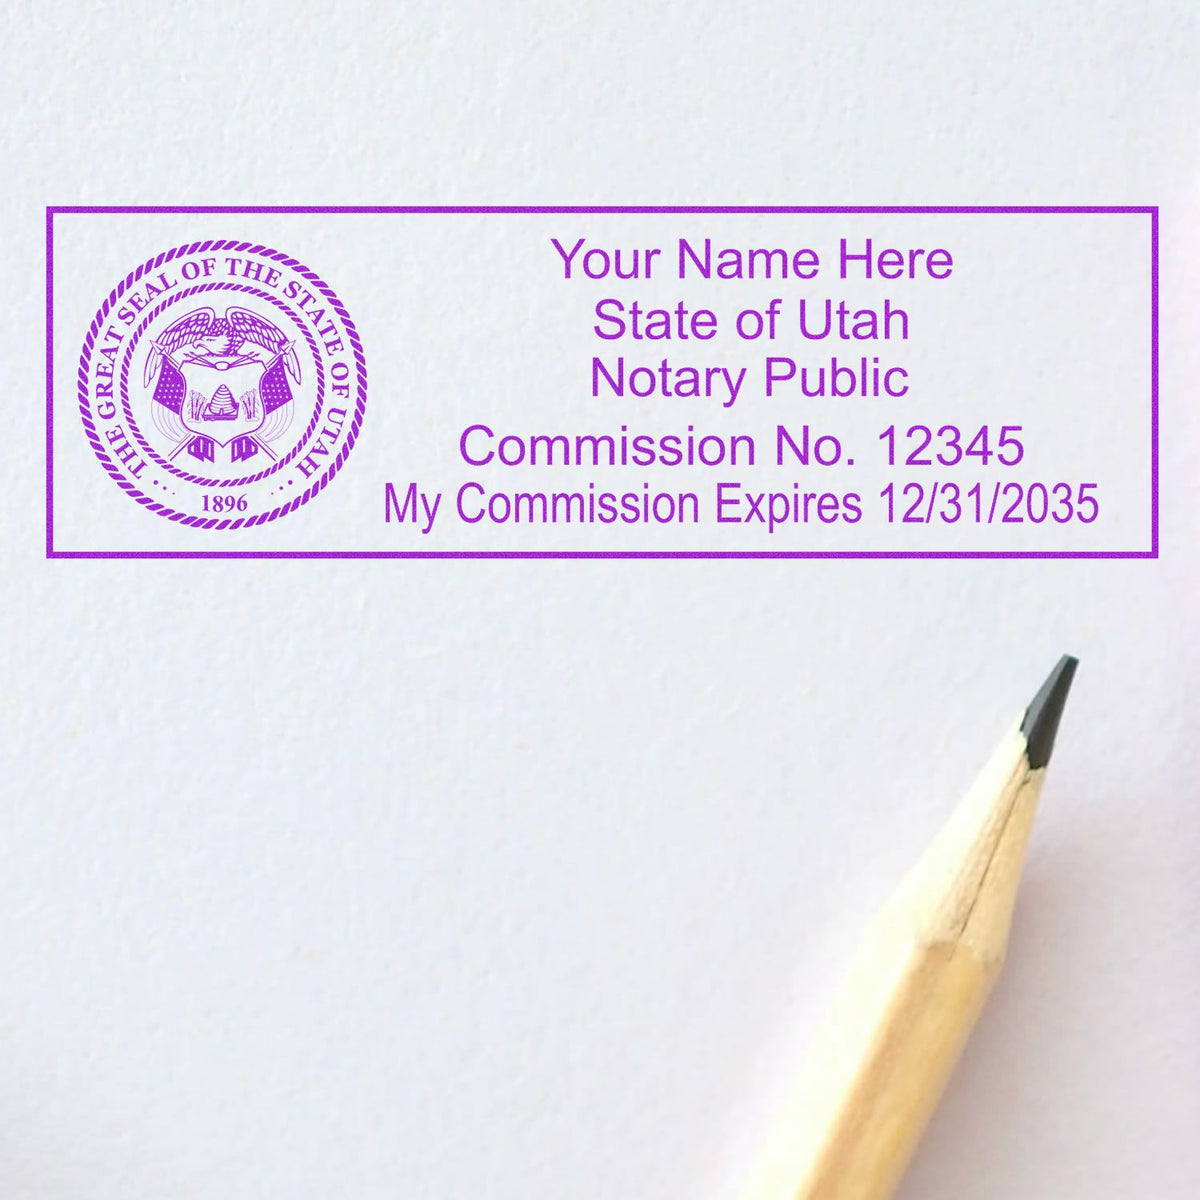 A lifestyle photo showing a stamped image of the Heavy-Duty Utah Rectangular Notary Stamp on a piece of paper